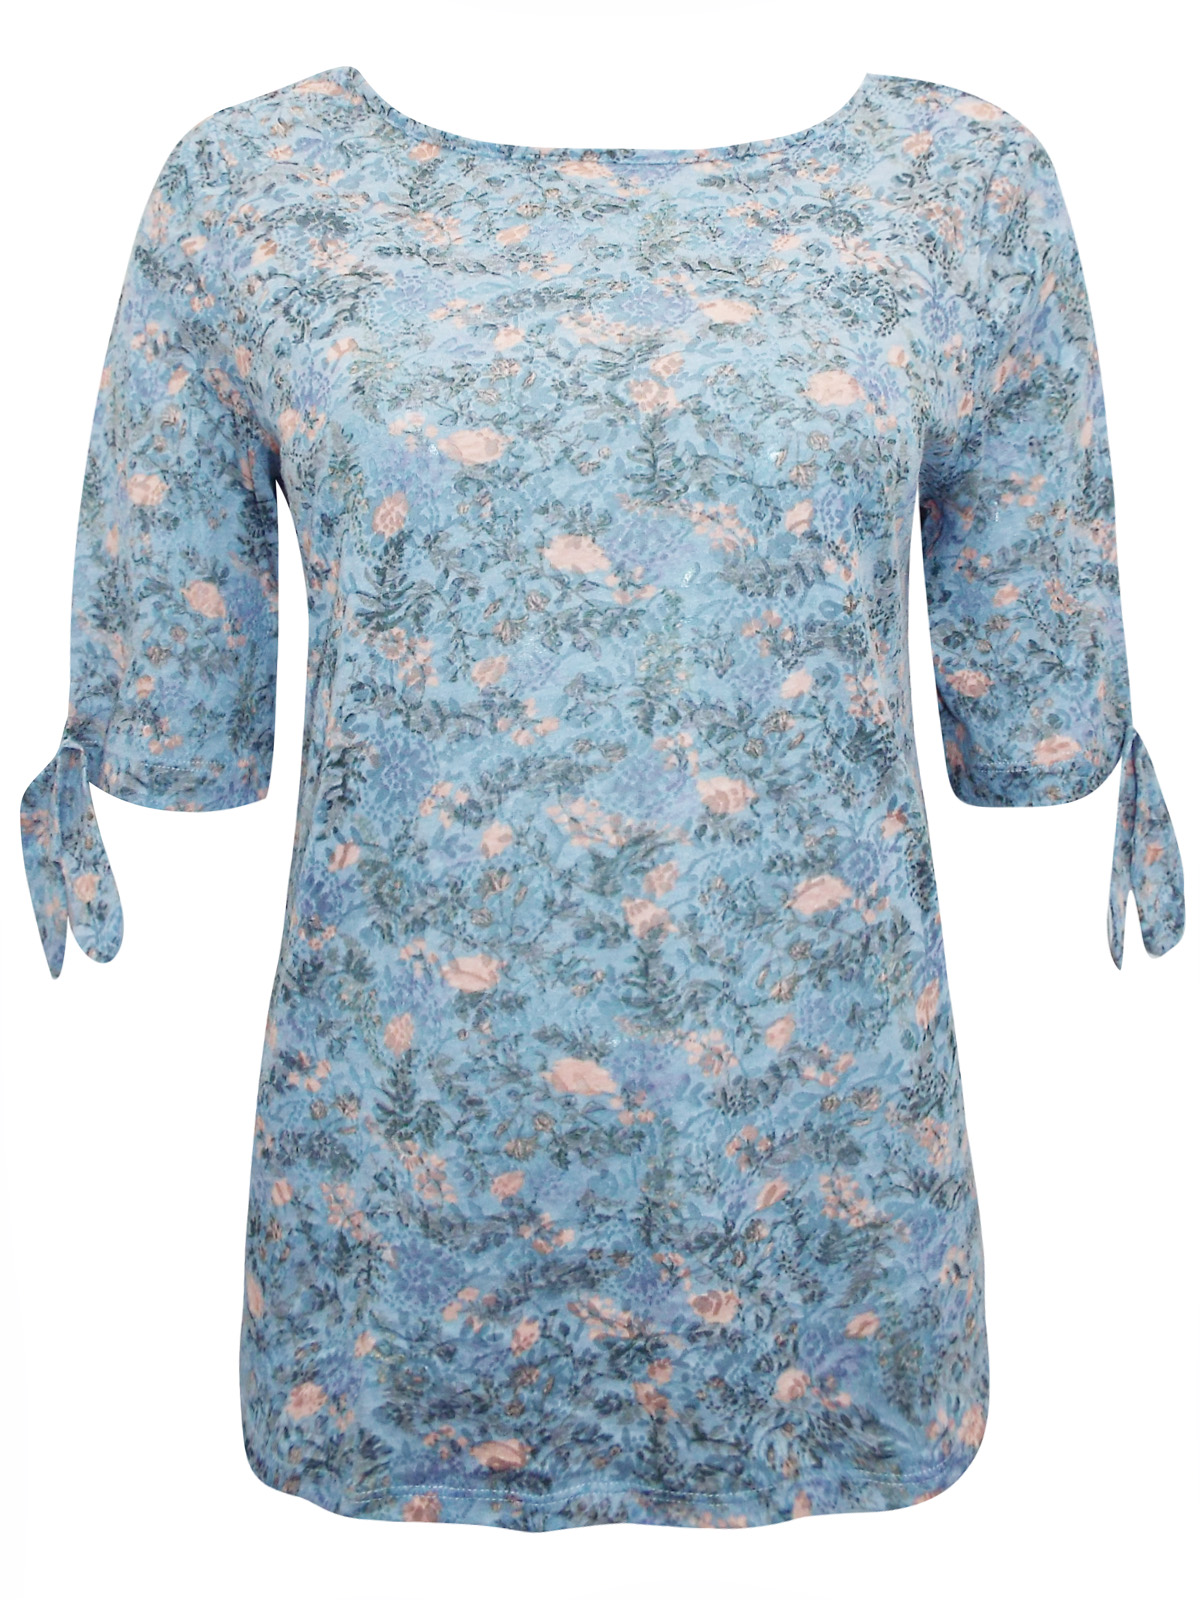 Cotton Traders BLUE Floral Print Burnout Top - Size 8 to 24